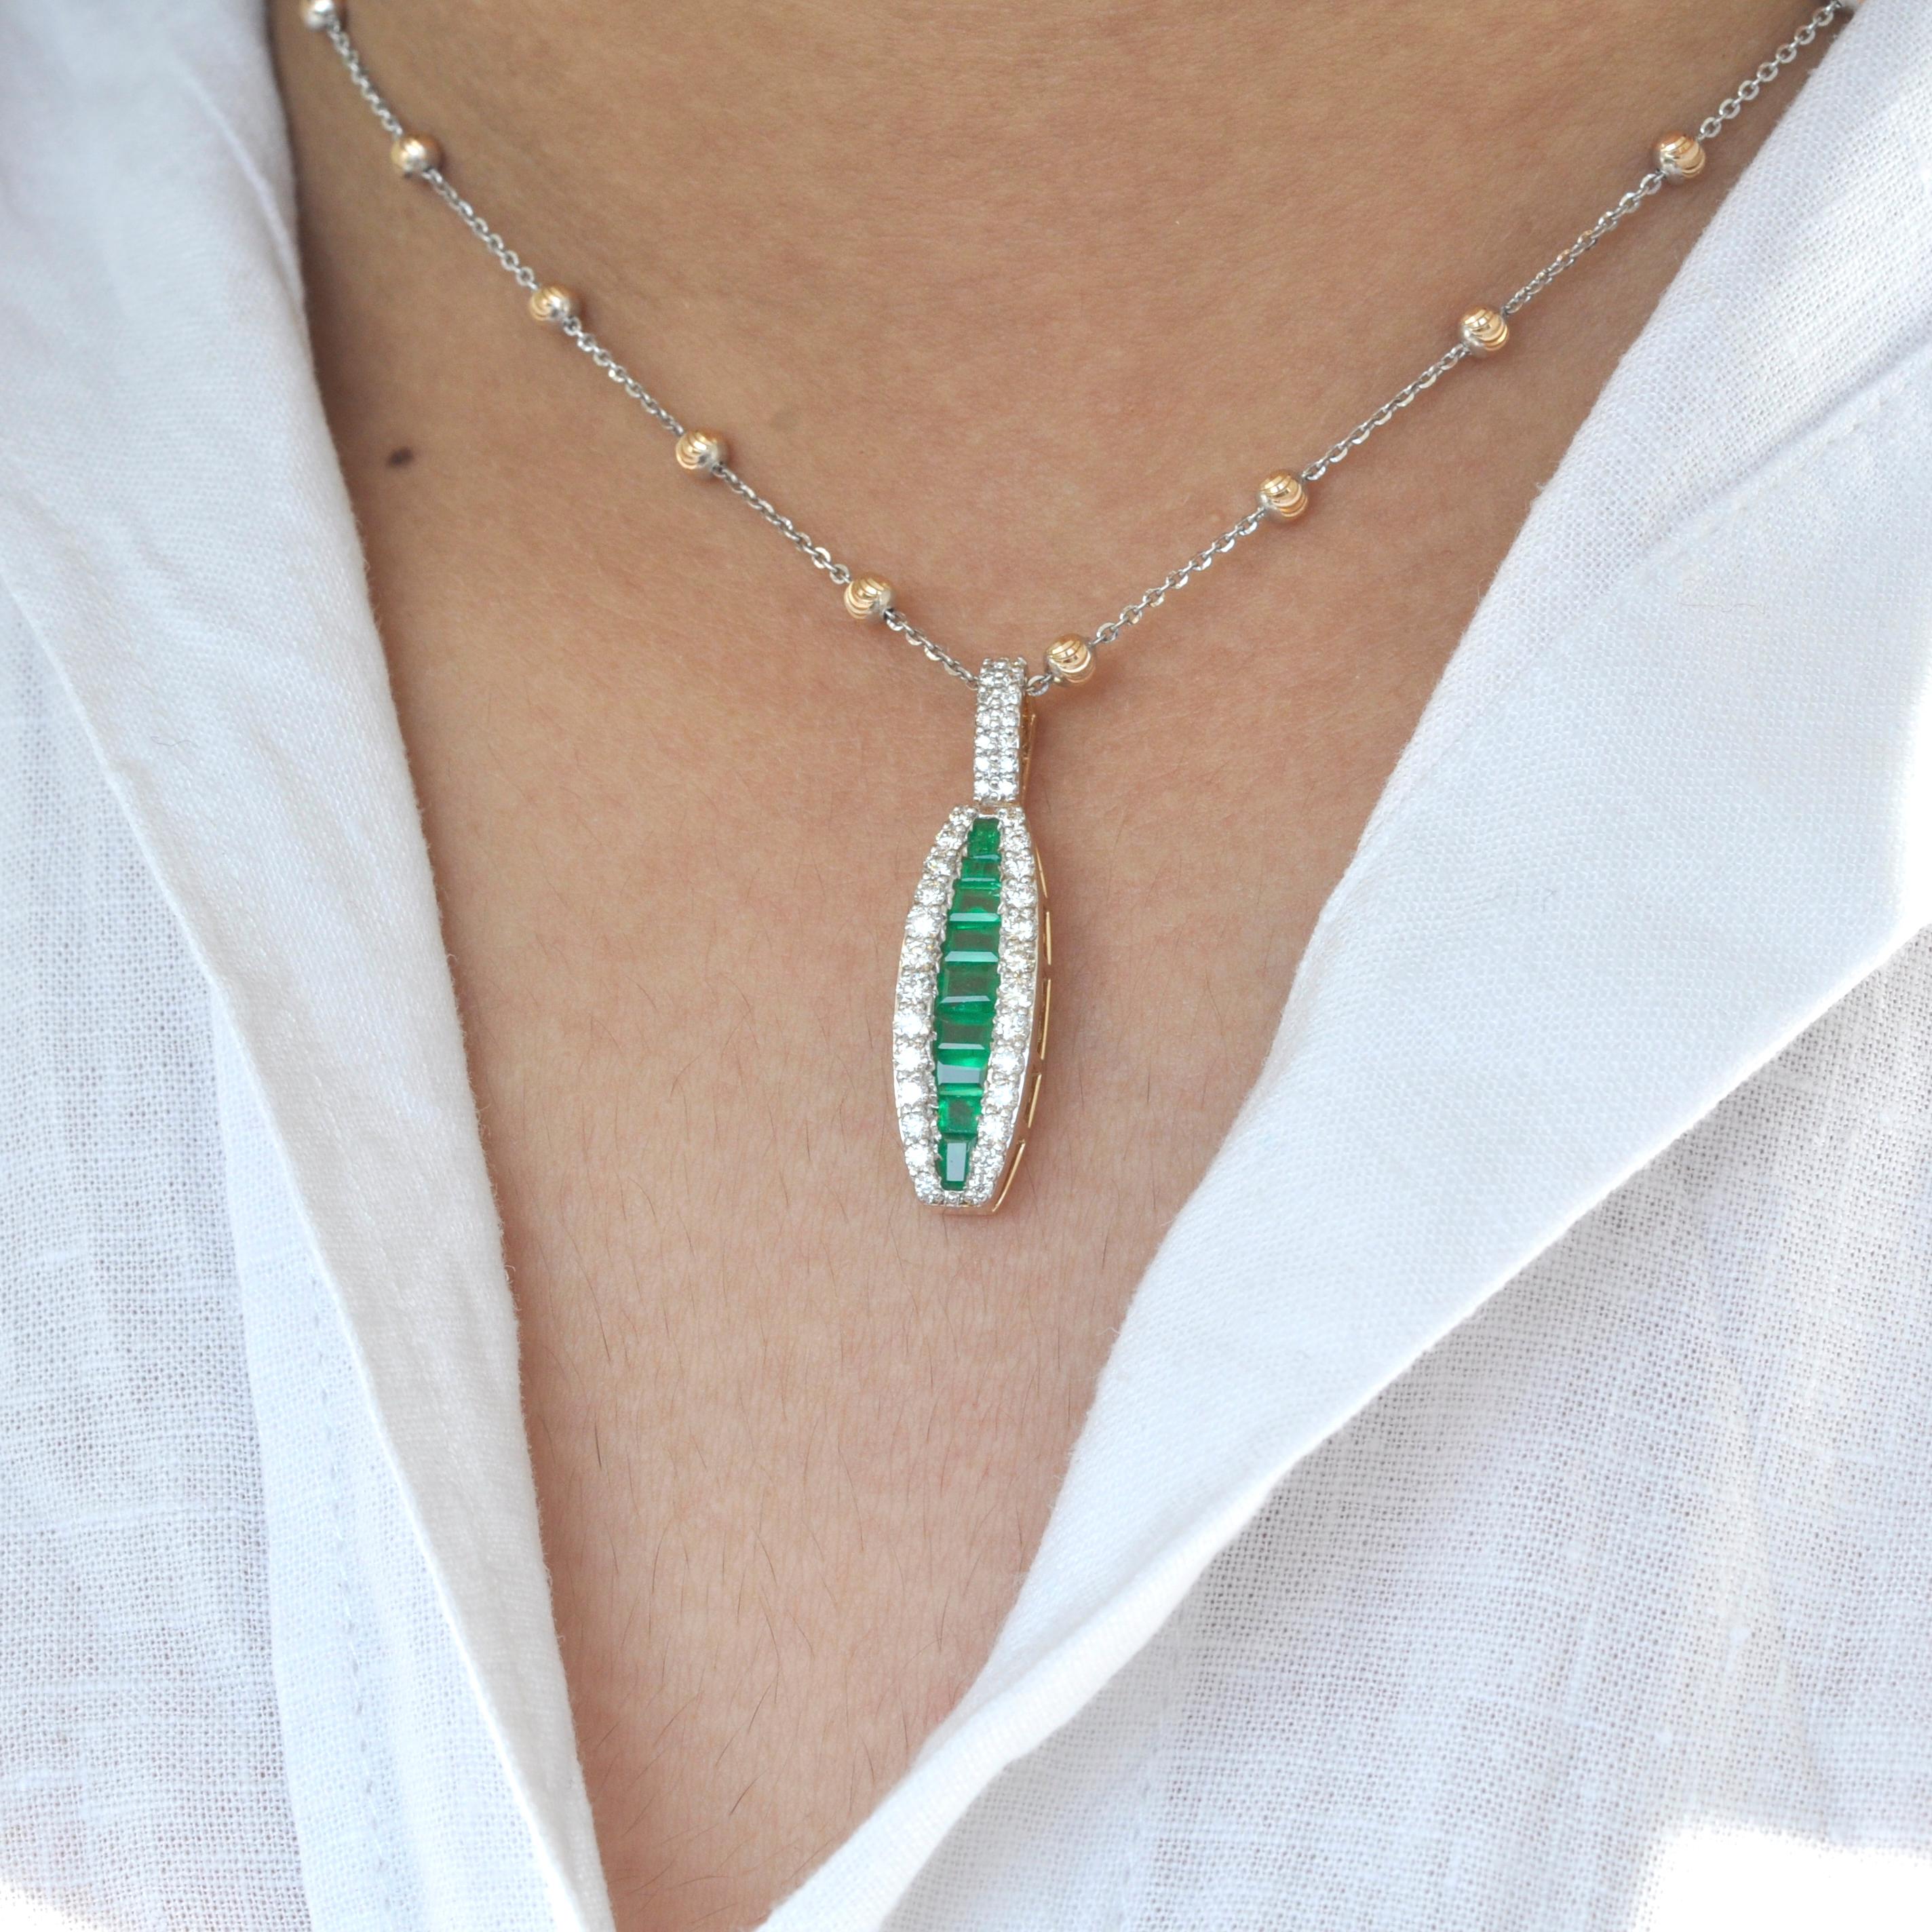 18 karat gold channel set emerald baguette diamond linear pendant necklace

The enchanting pendant with the natural emeralds incorporated within an equivalent layer of micro pave set diamonds on either is distinctive in its very form. The